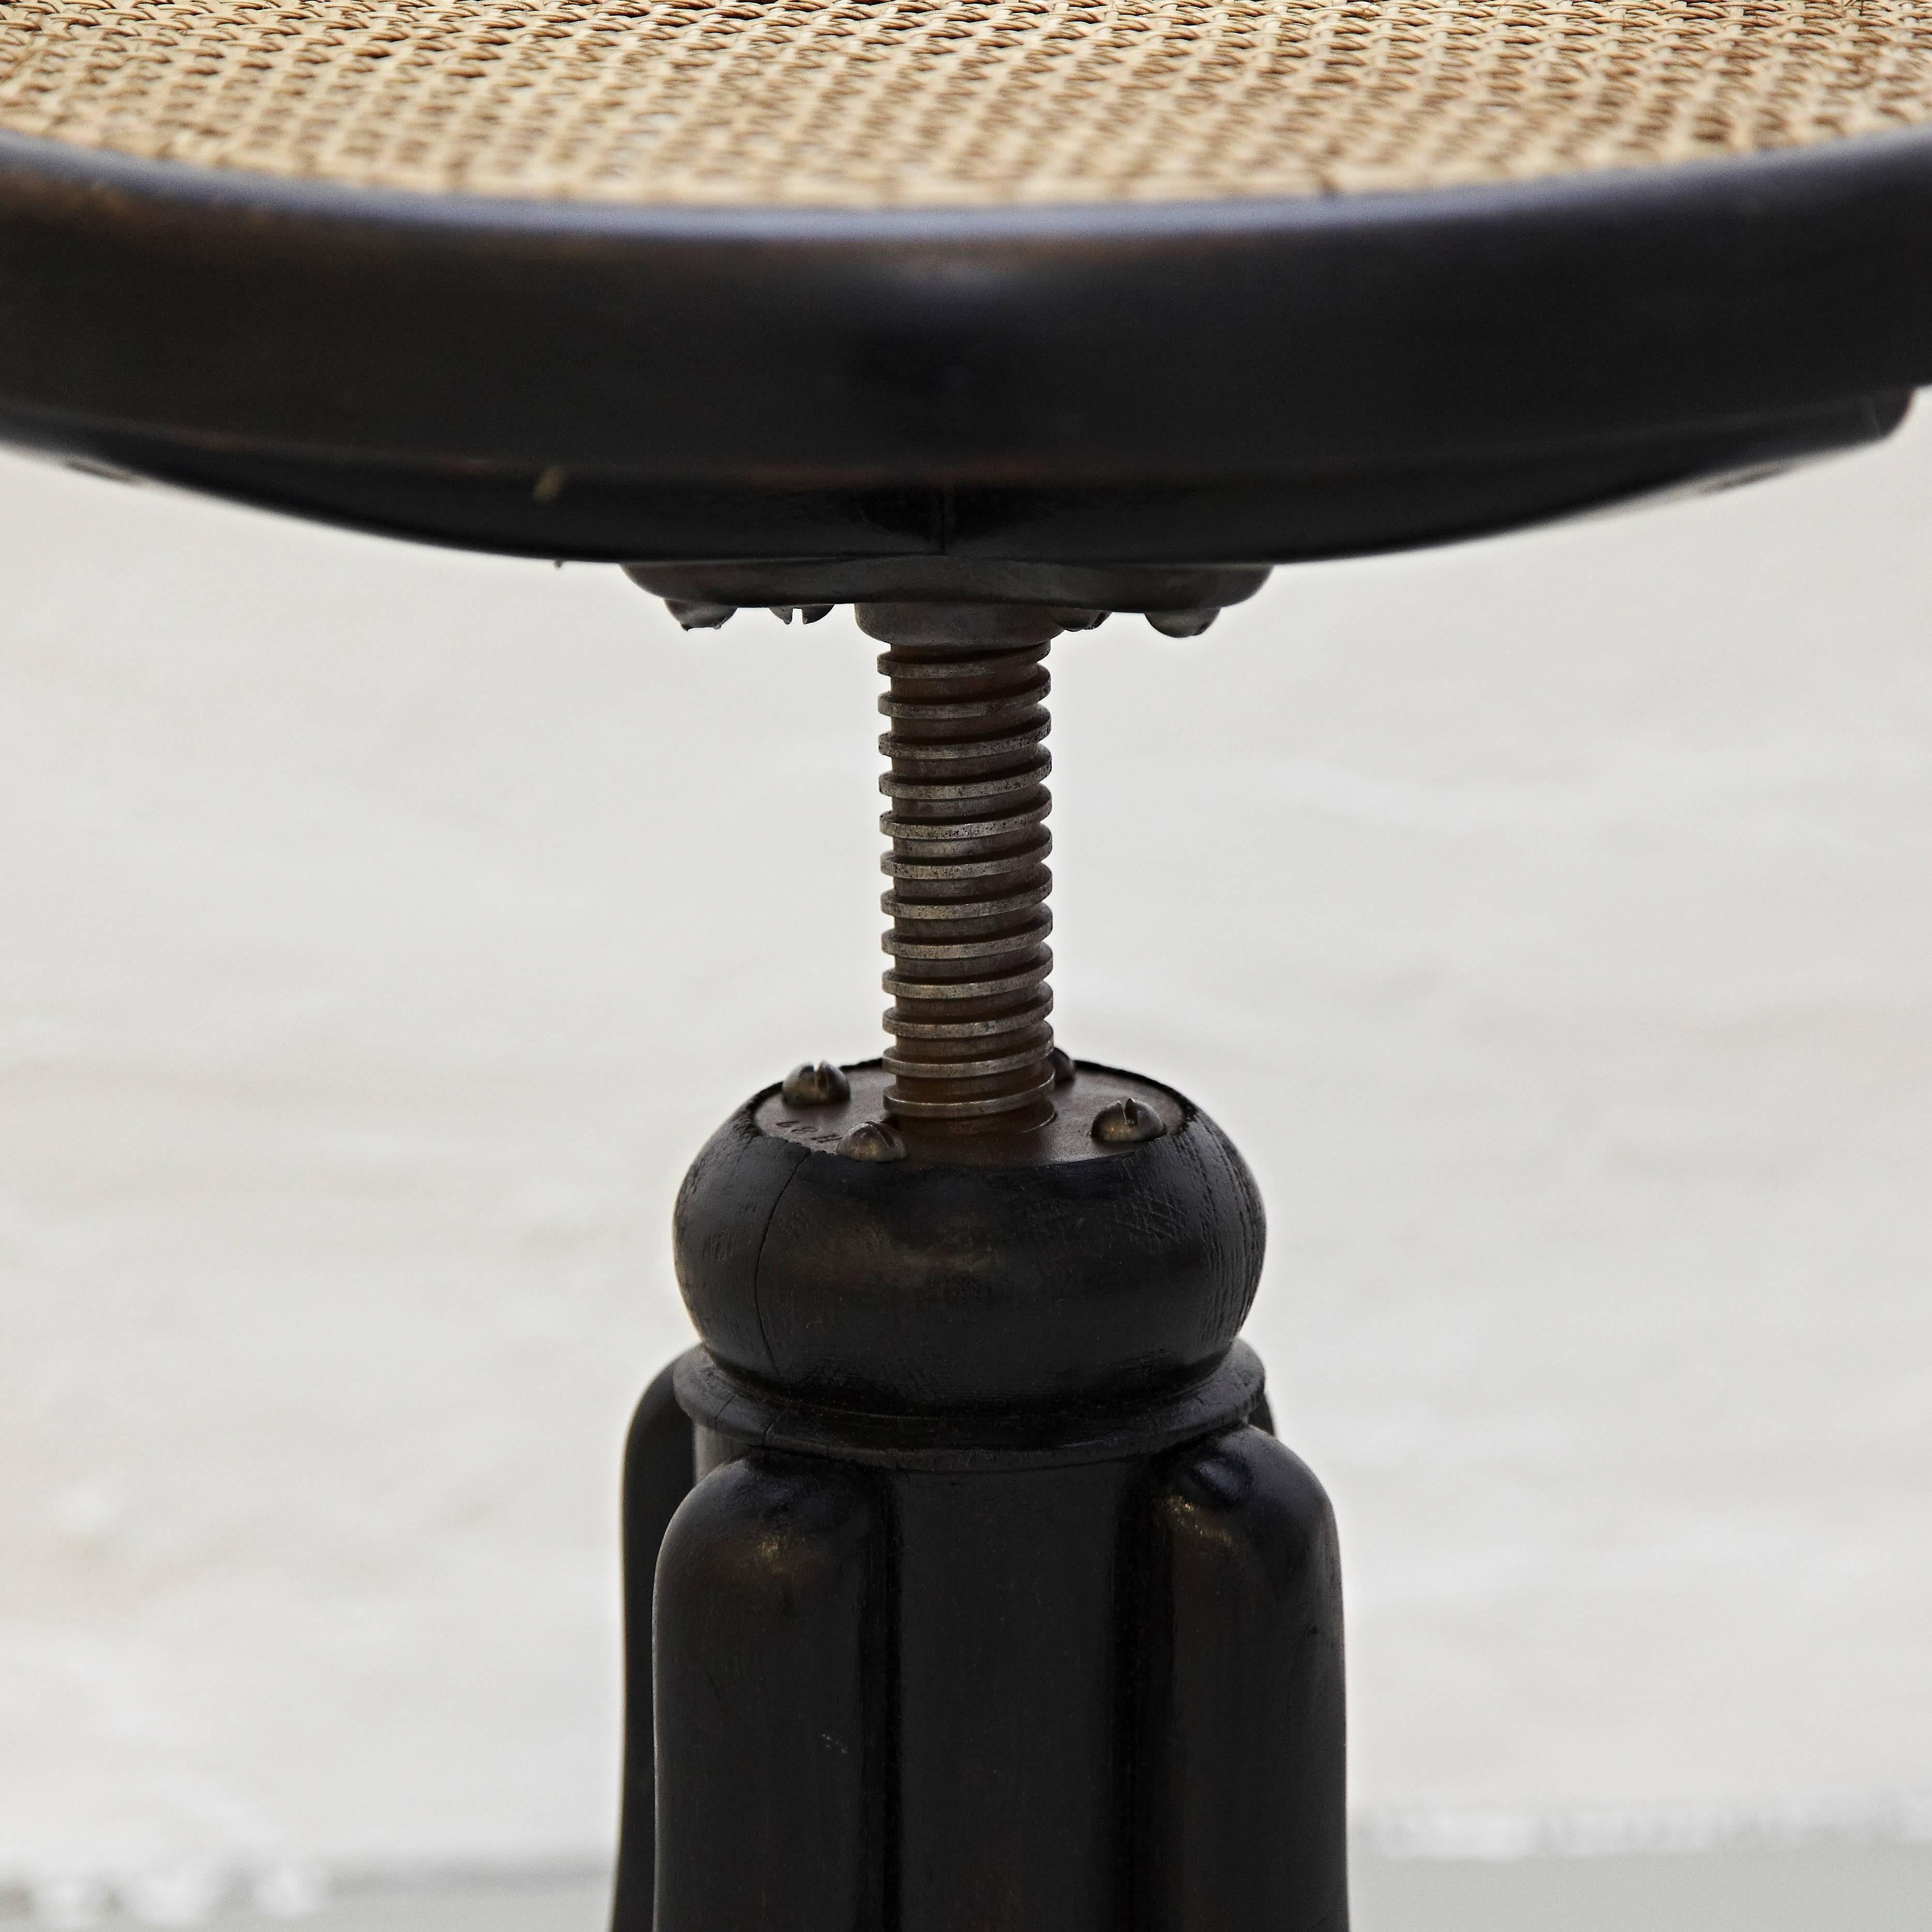 Thonet piano stool, manufactured by Thonet, circa 1940.

In good original condition, with minor wear consistent with age and use, preserving a beautiful patina.

Thonet was the son of master tanner Franz Anton Thonet of Boppard. Following a